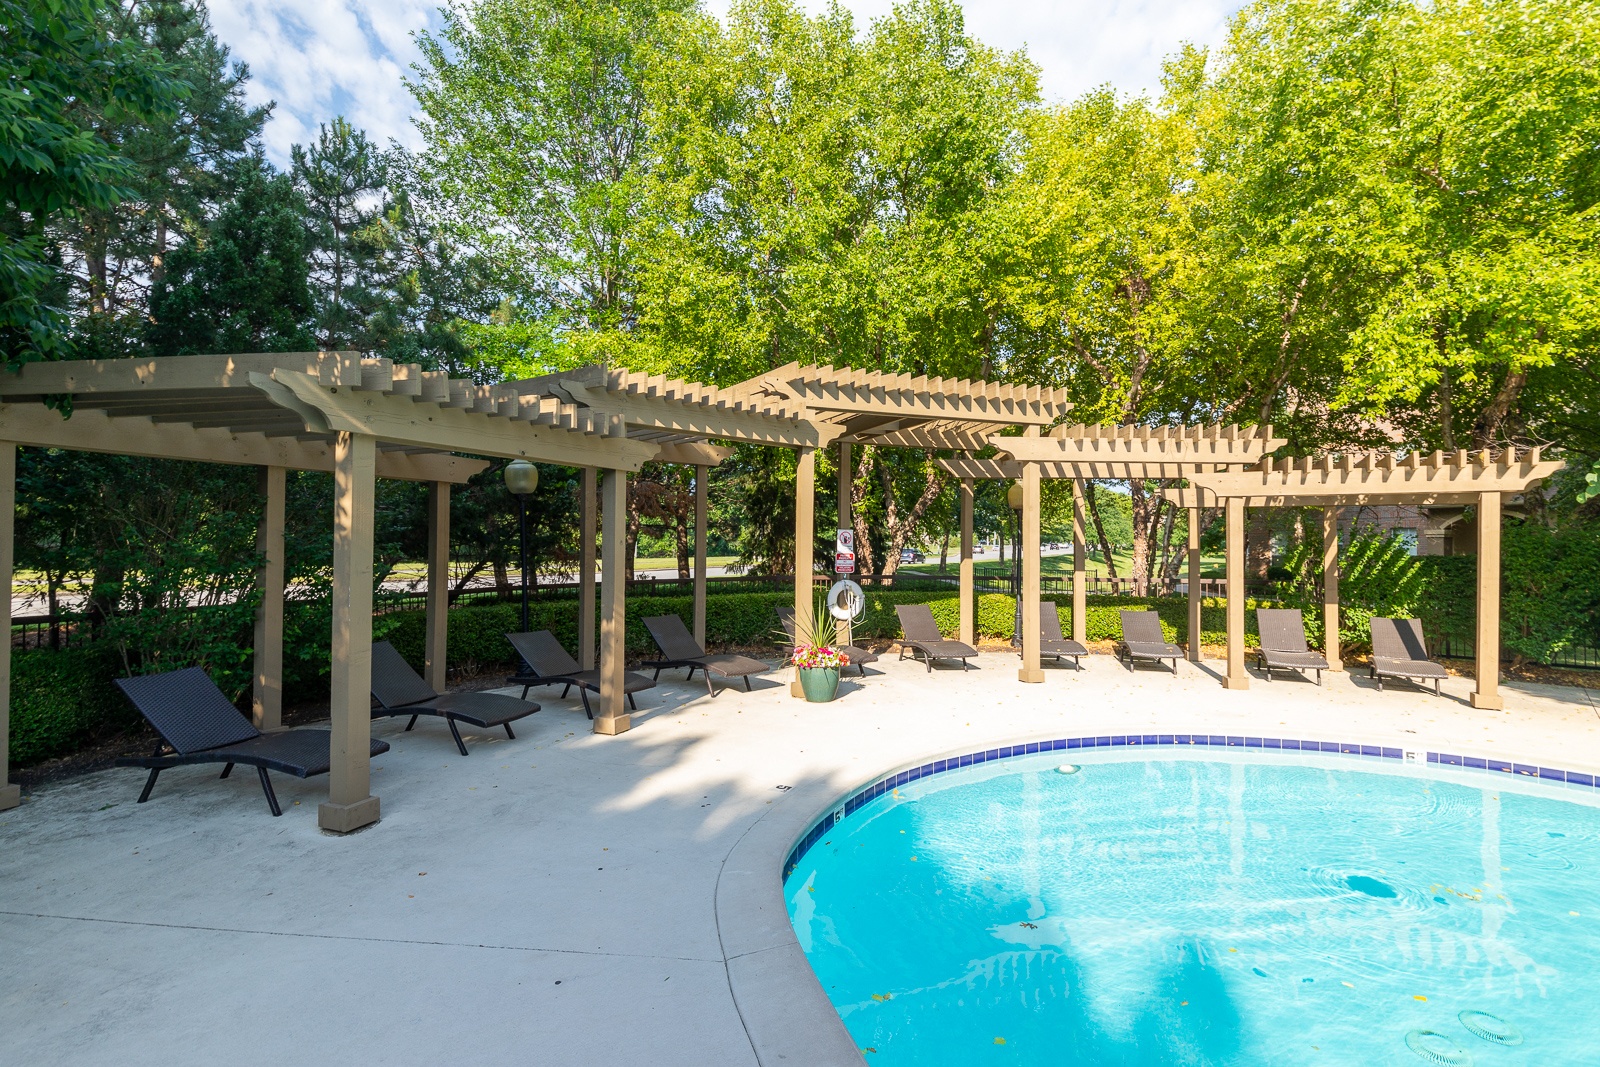 Extensive Resort Inspired Pool Deck at Crowne Chase Apartment Homes, Overland Park, Kansas